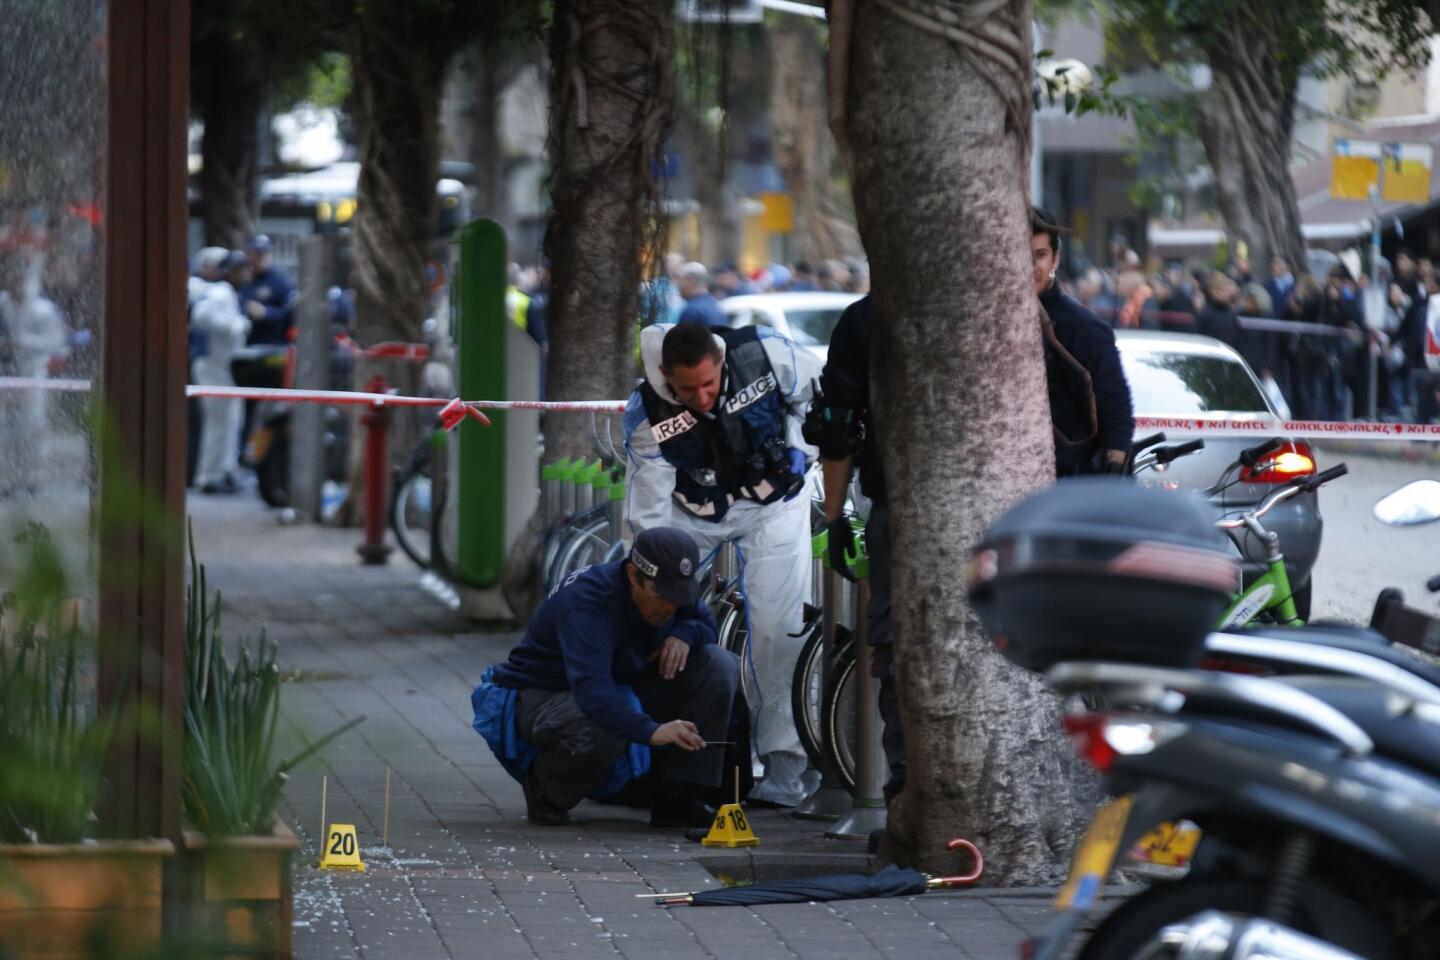 Israeli forensics inspect the site of an attack by an unidentified gunman, who opened fire at a pub in the Israeli city of Tel Aviv killing two people and wounding five others on Jan. 1, 2016, police and medical officials said.